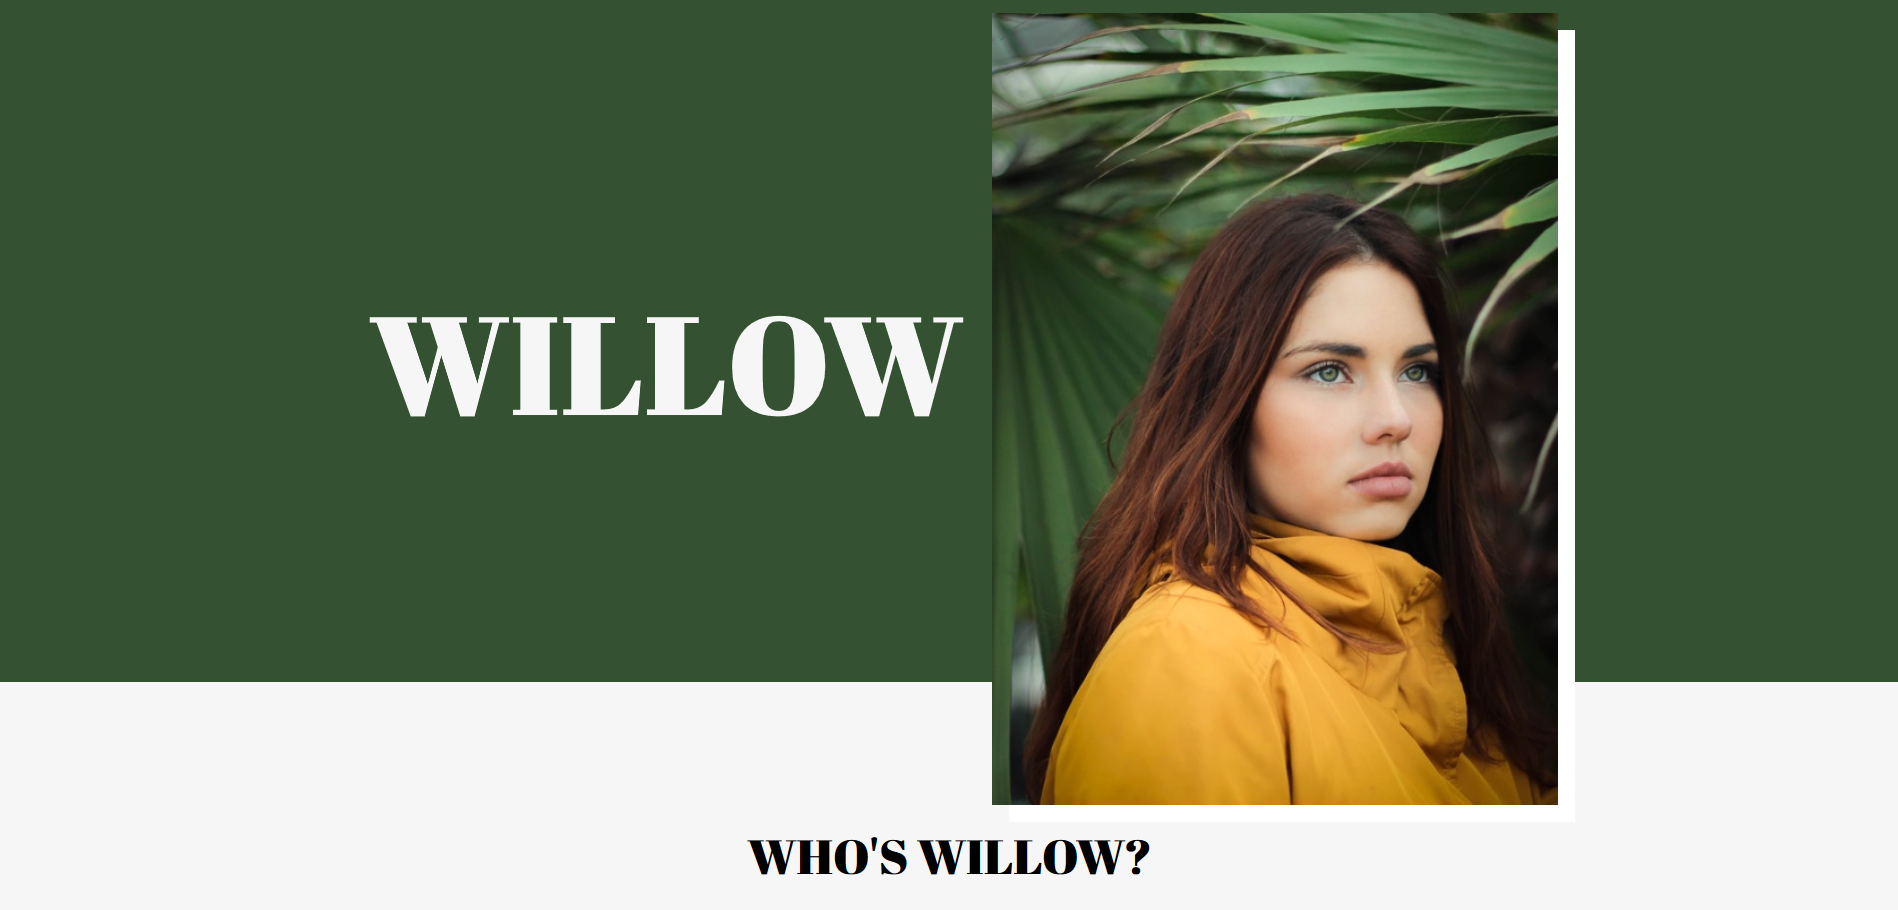 main homepage layout of Willow website